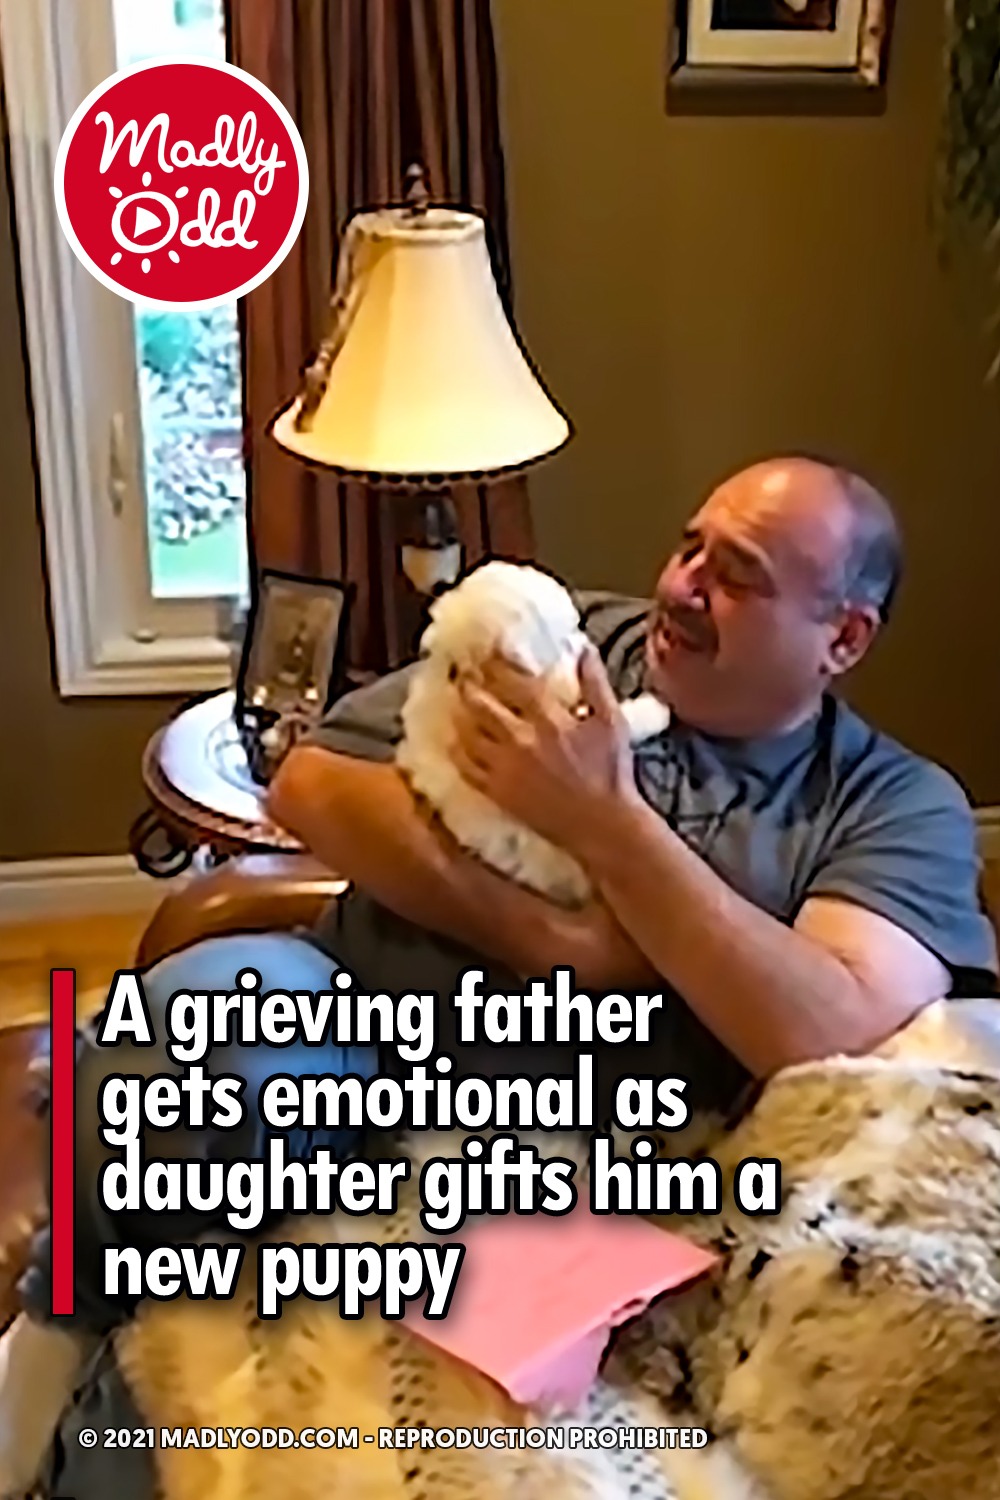 A grieving father gets emotional as daughter gifts him a new puppy